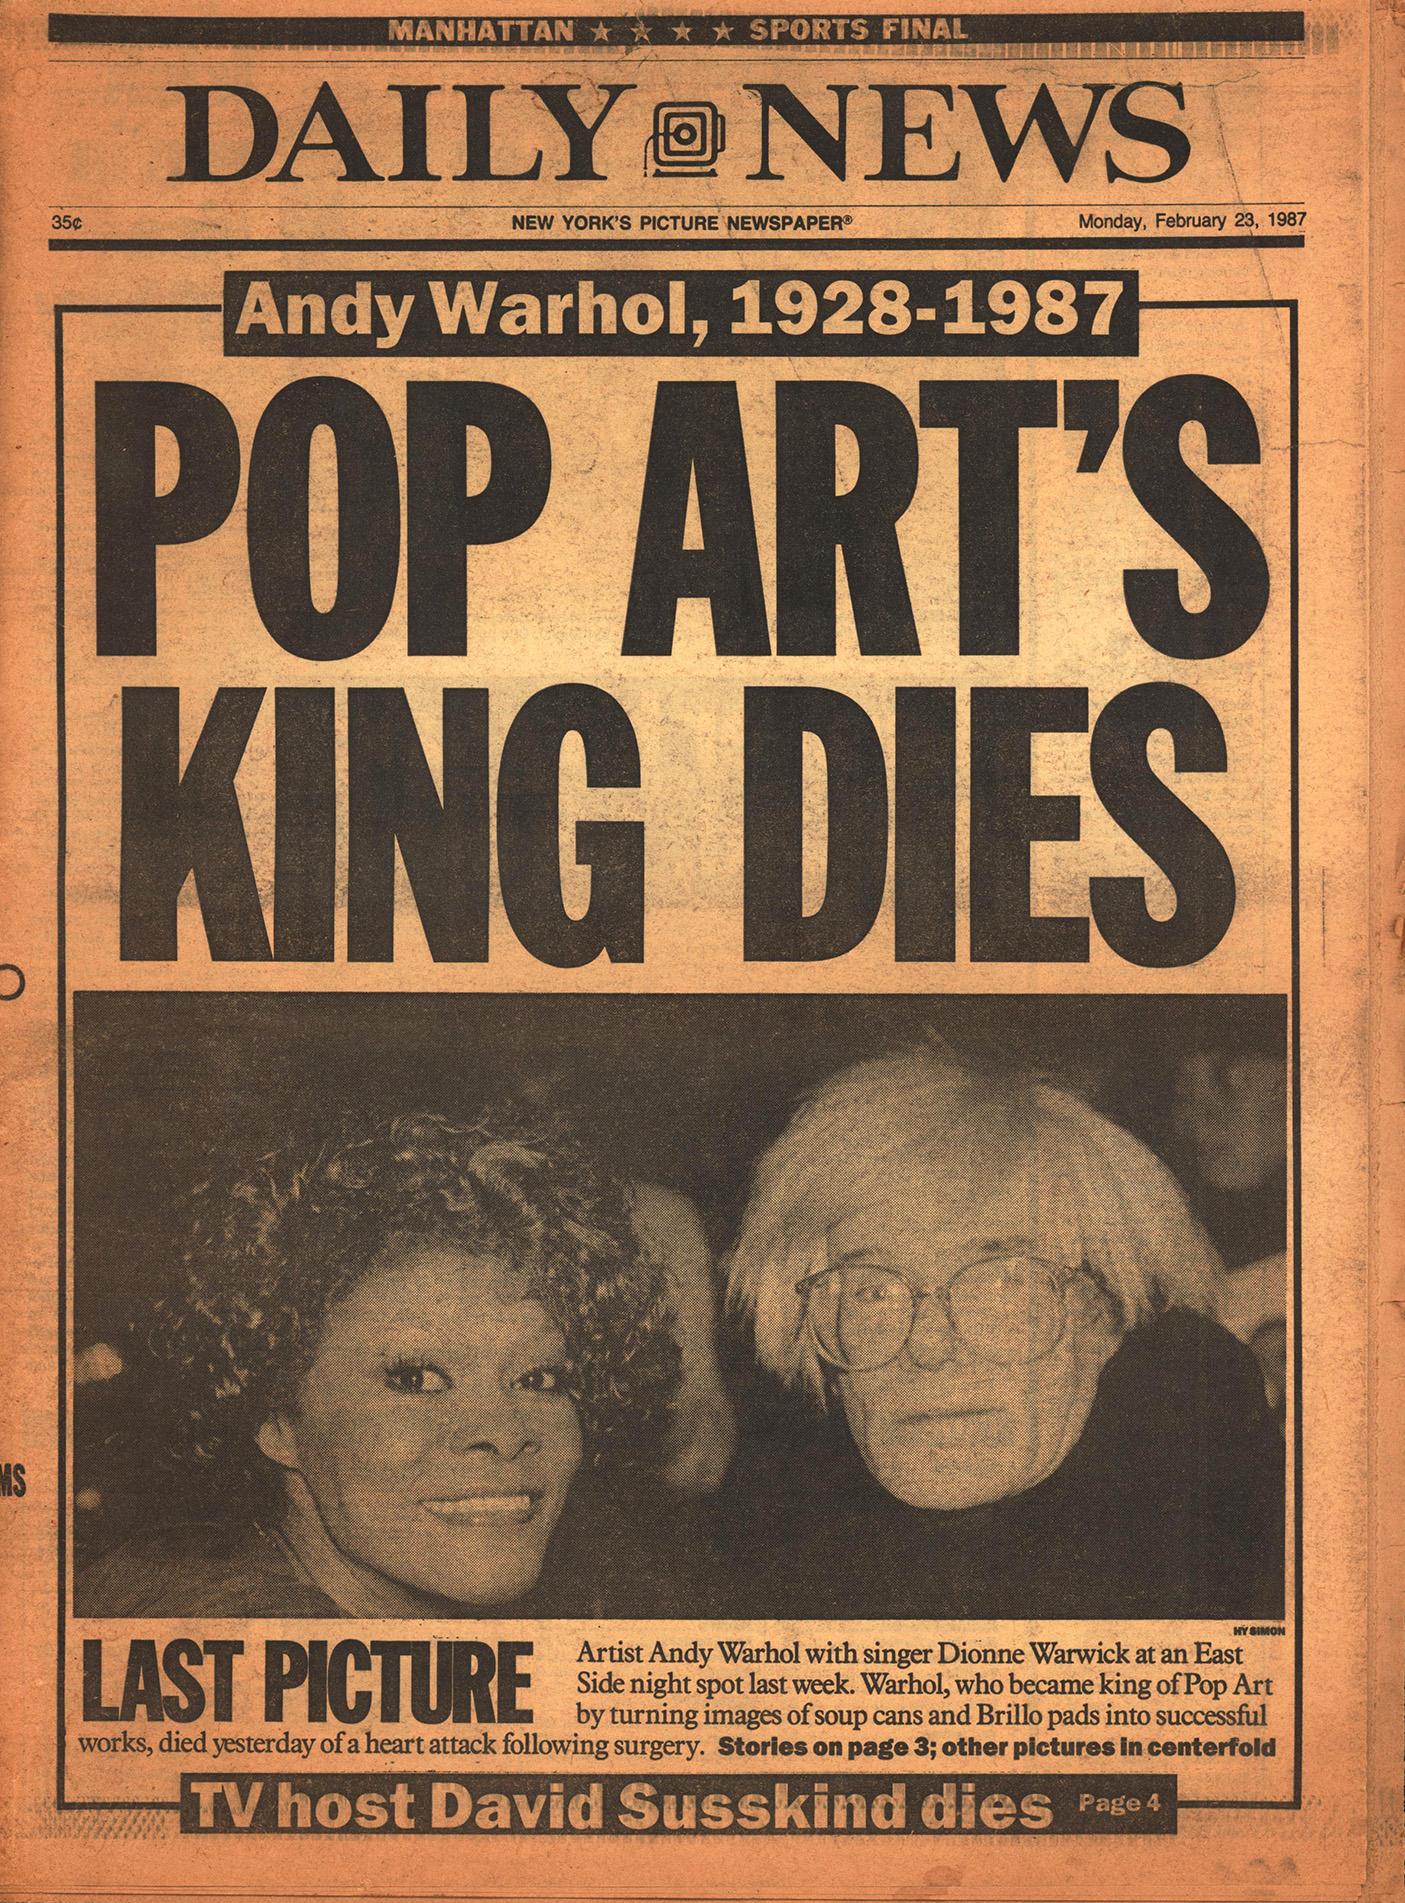 Andy Warhol Dies! Set of four complete 1987 New York newspapers announcing Warhol's death.
A rare, highly sought-after series that would look unique framed together as a collage. An ironic twist on Warhol's Headline Series. Unique Warhol